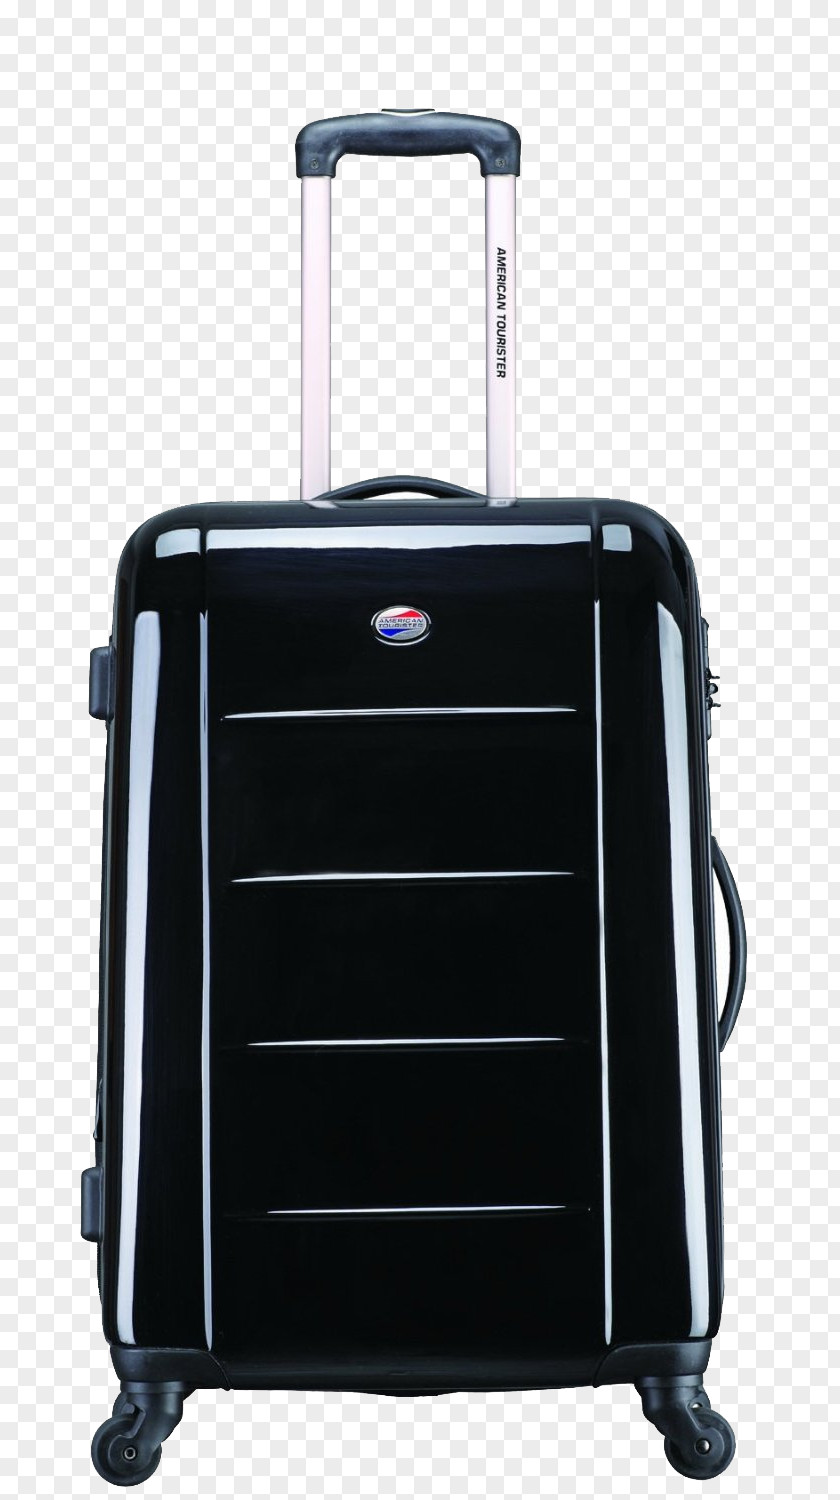 American Tourister Luggage Brands Hand Suitcase Baggage PNG